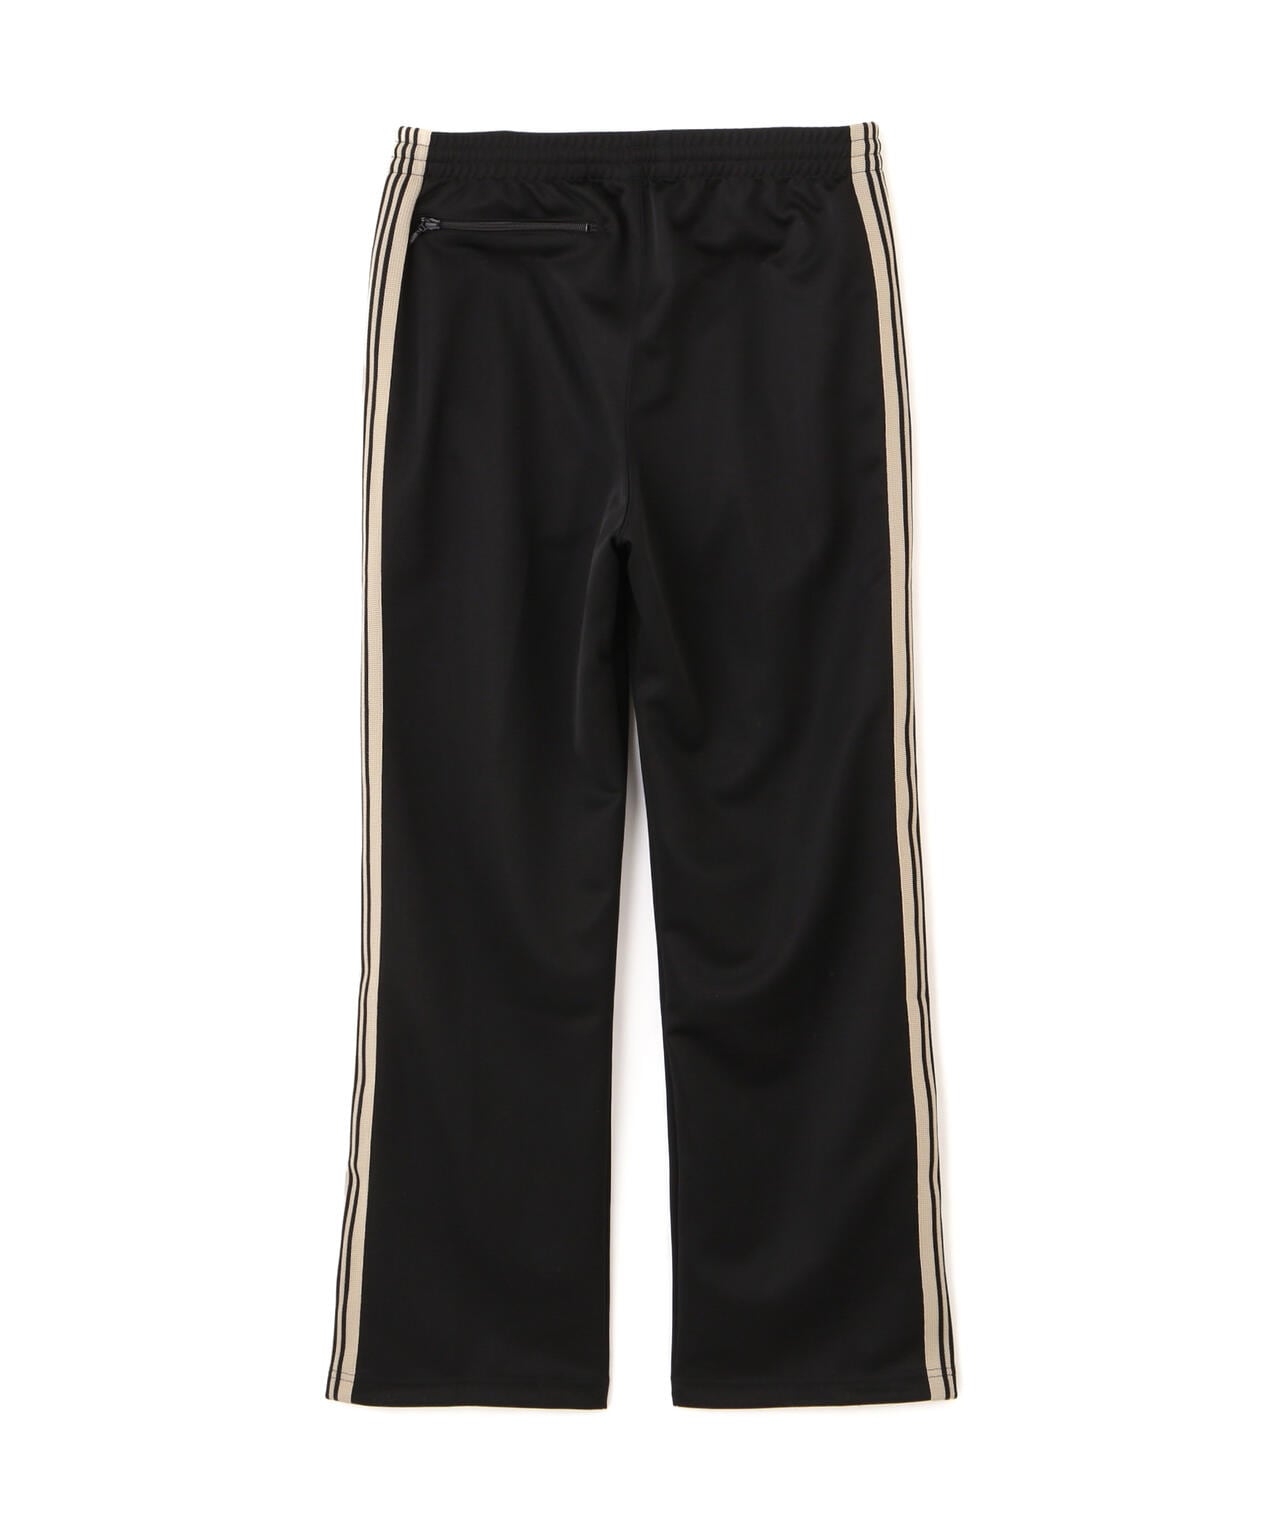 NEEDLES/ニードルズ/LHP Exclusive Track Pant - Poly Smooth/別注 